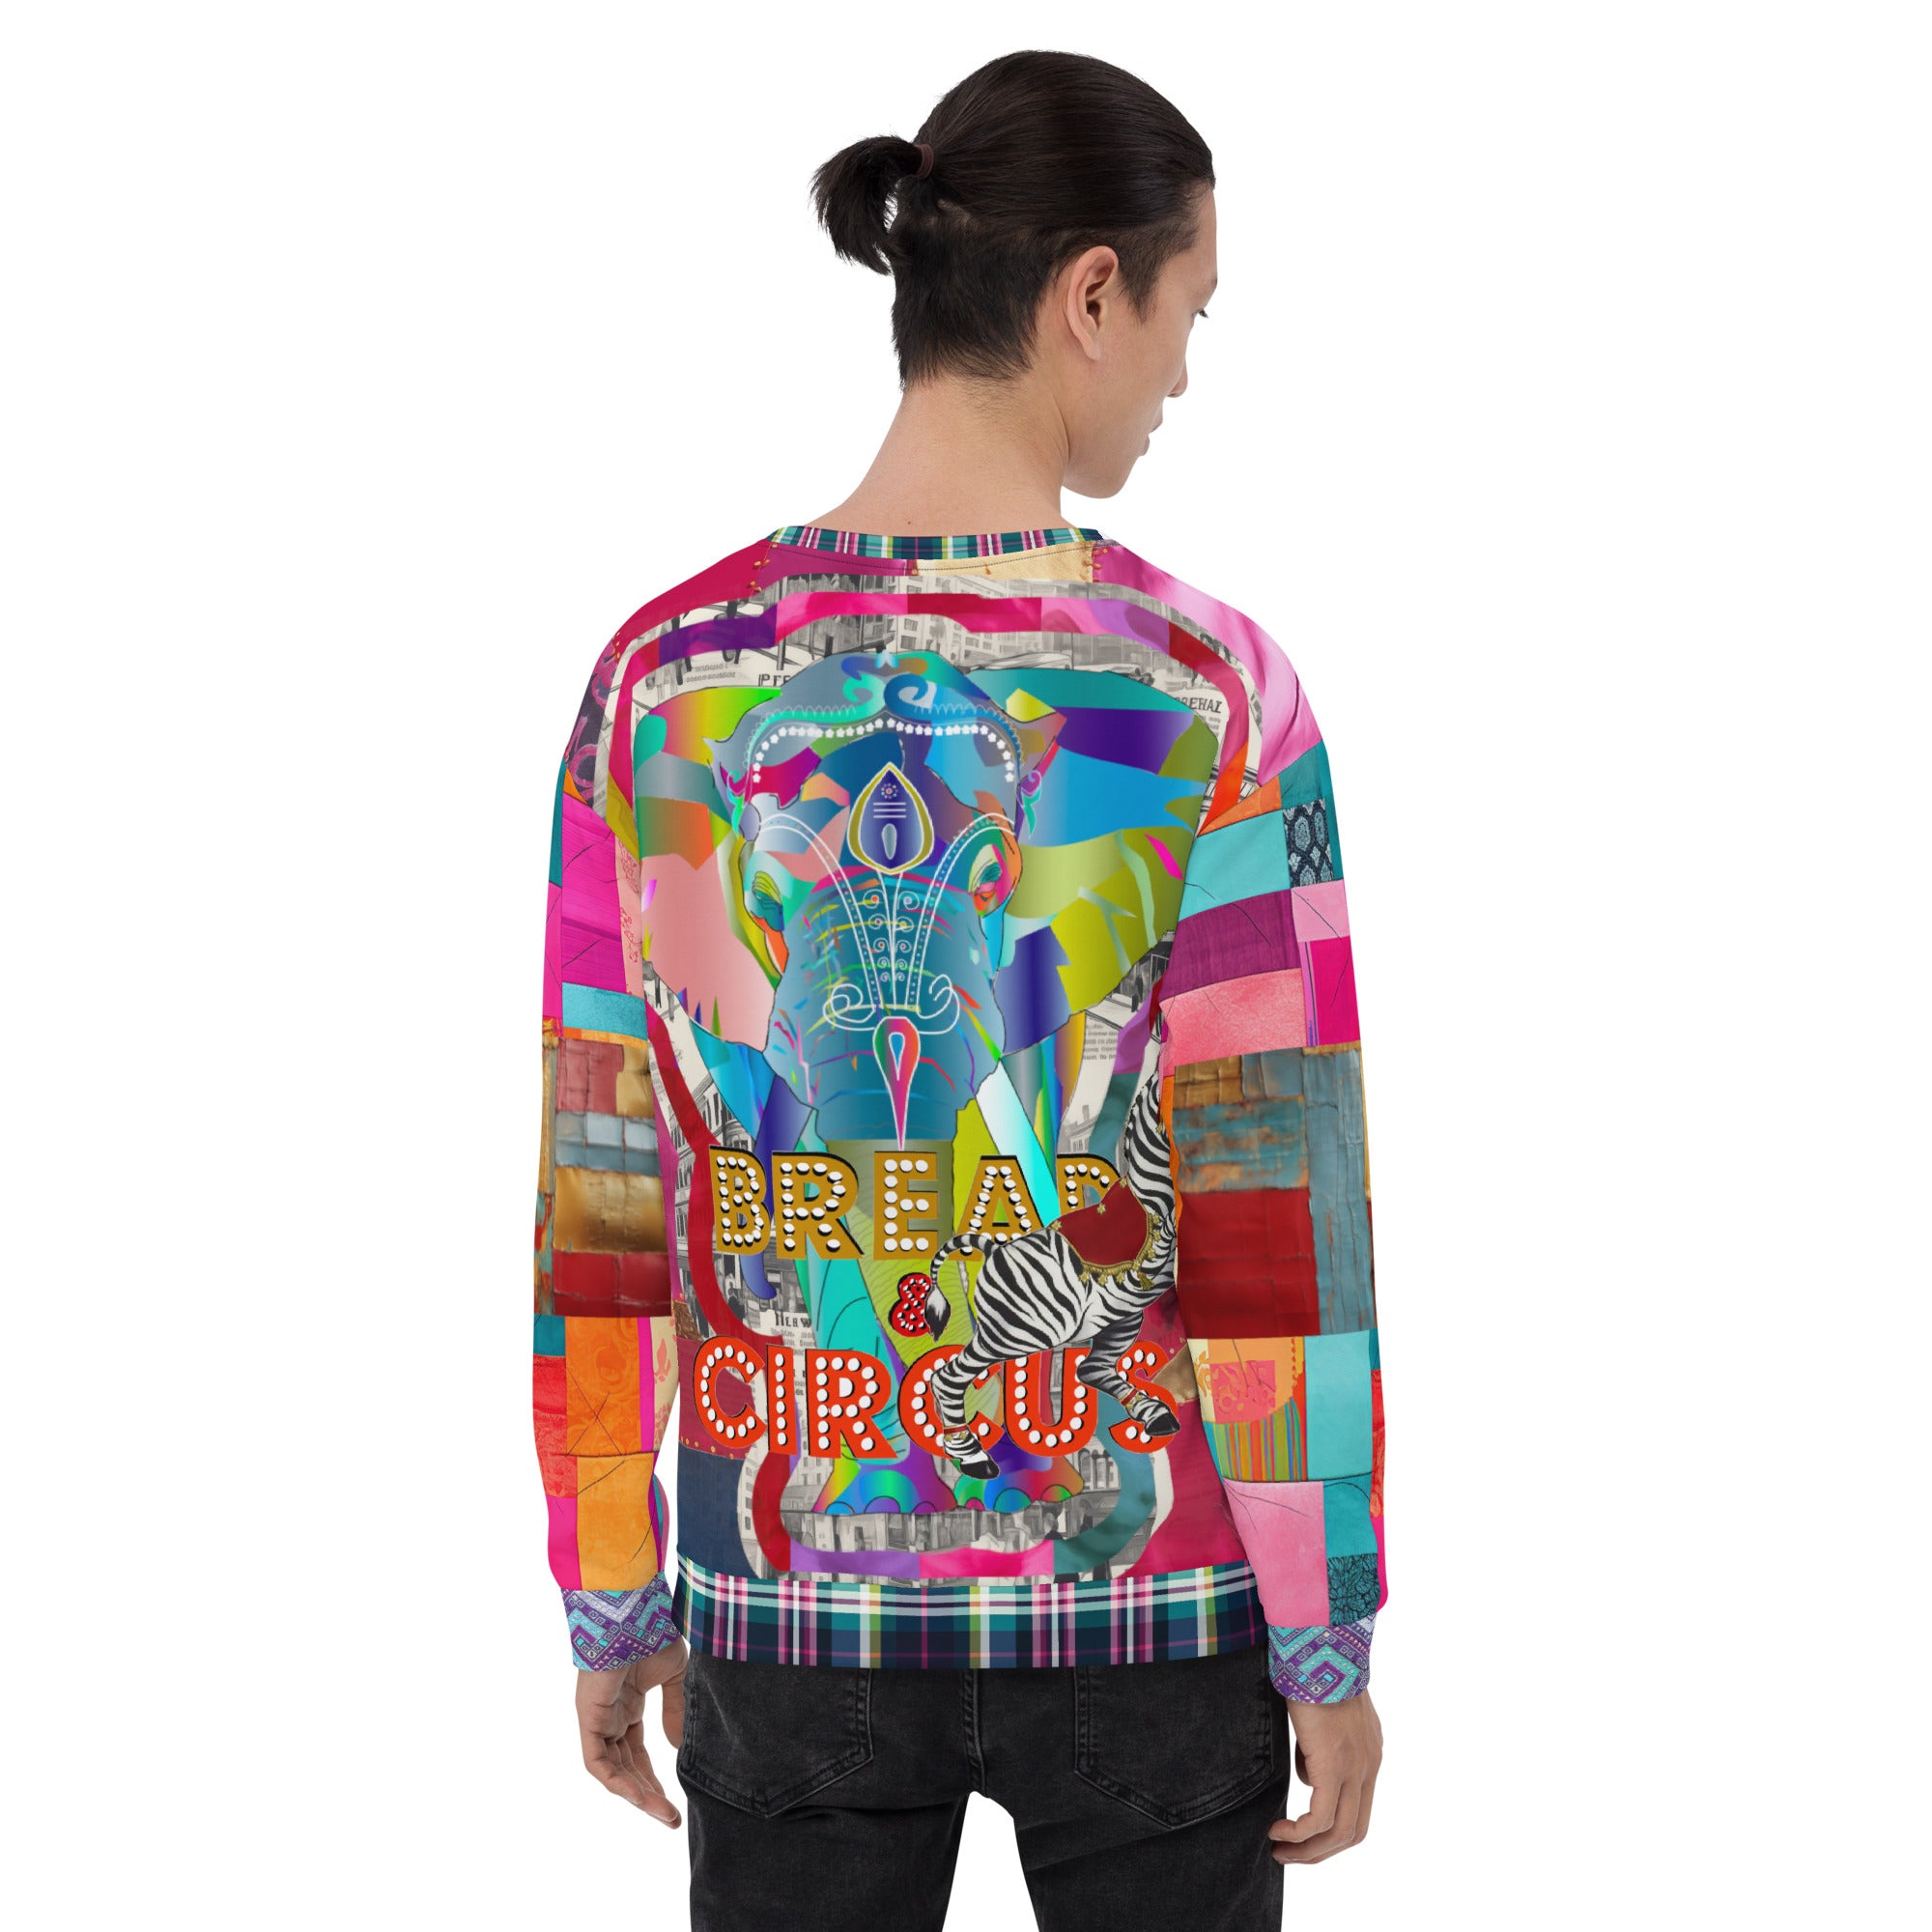 Bread and Circus Social Commentary Eco-Poly Unisex Sweatshirt